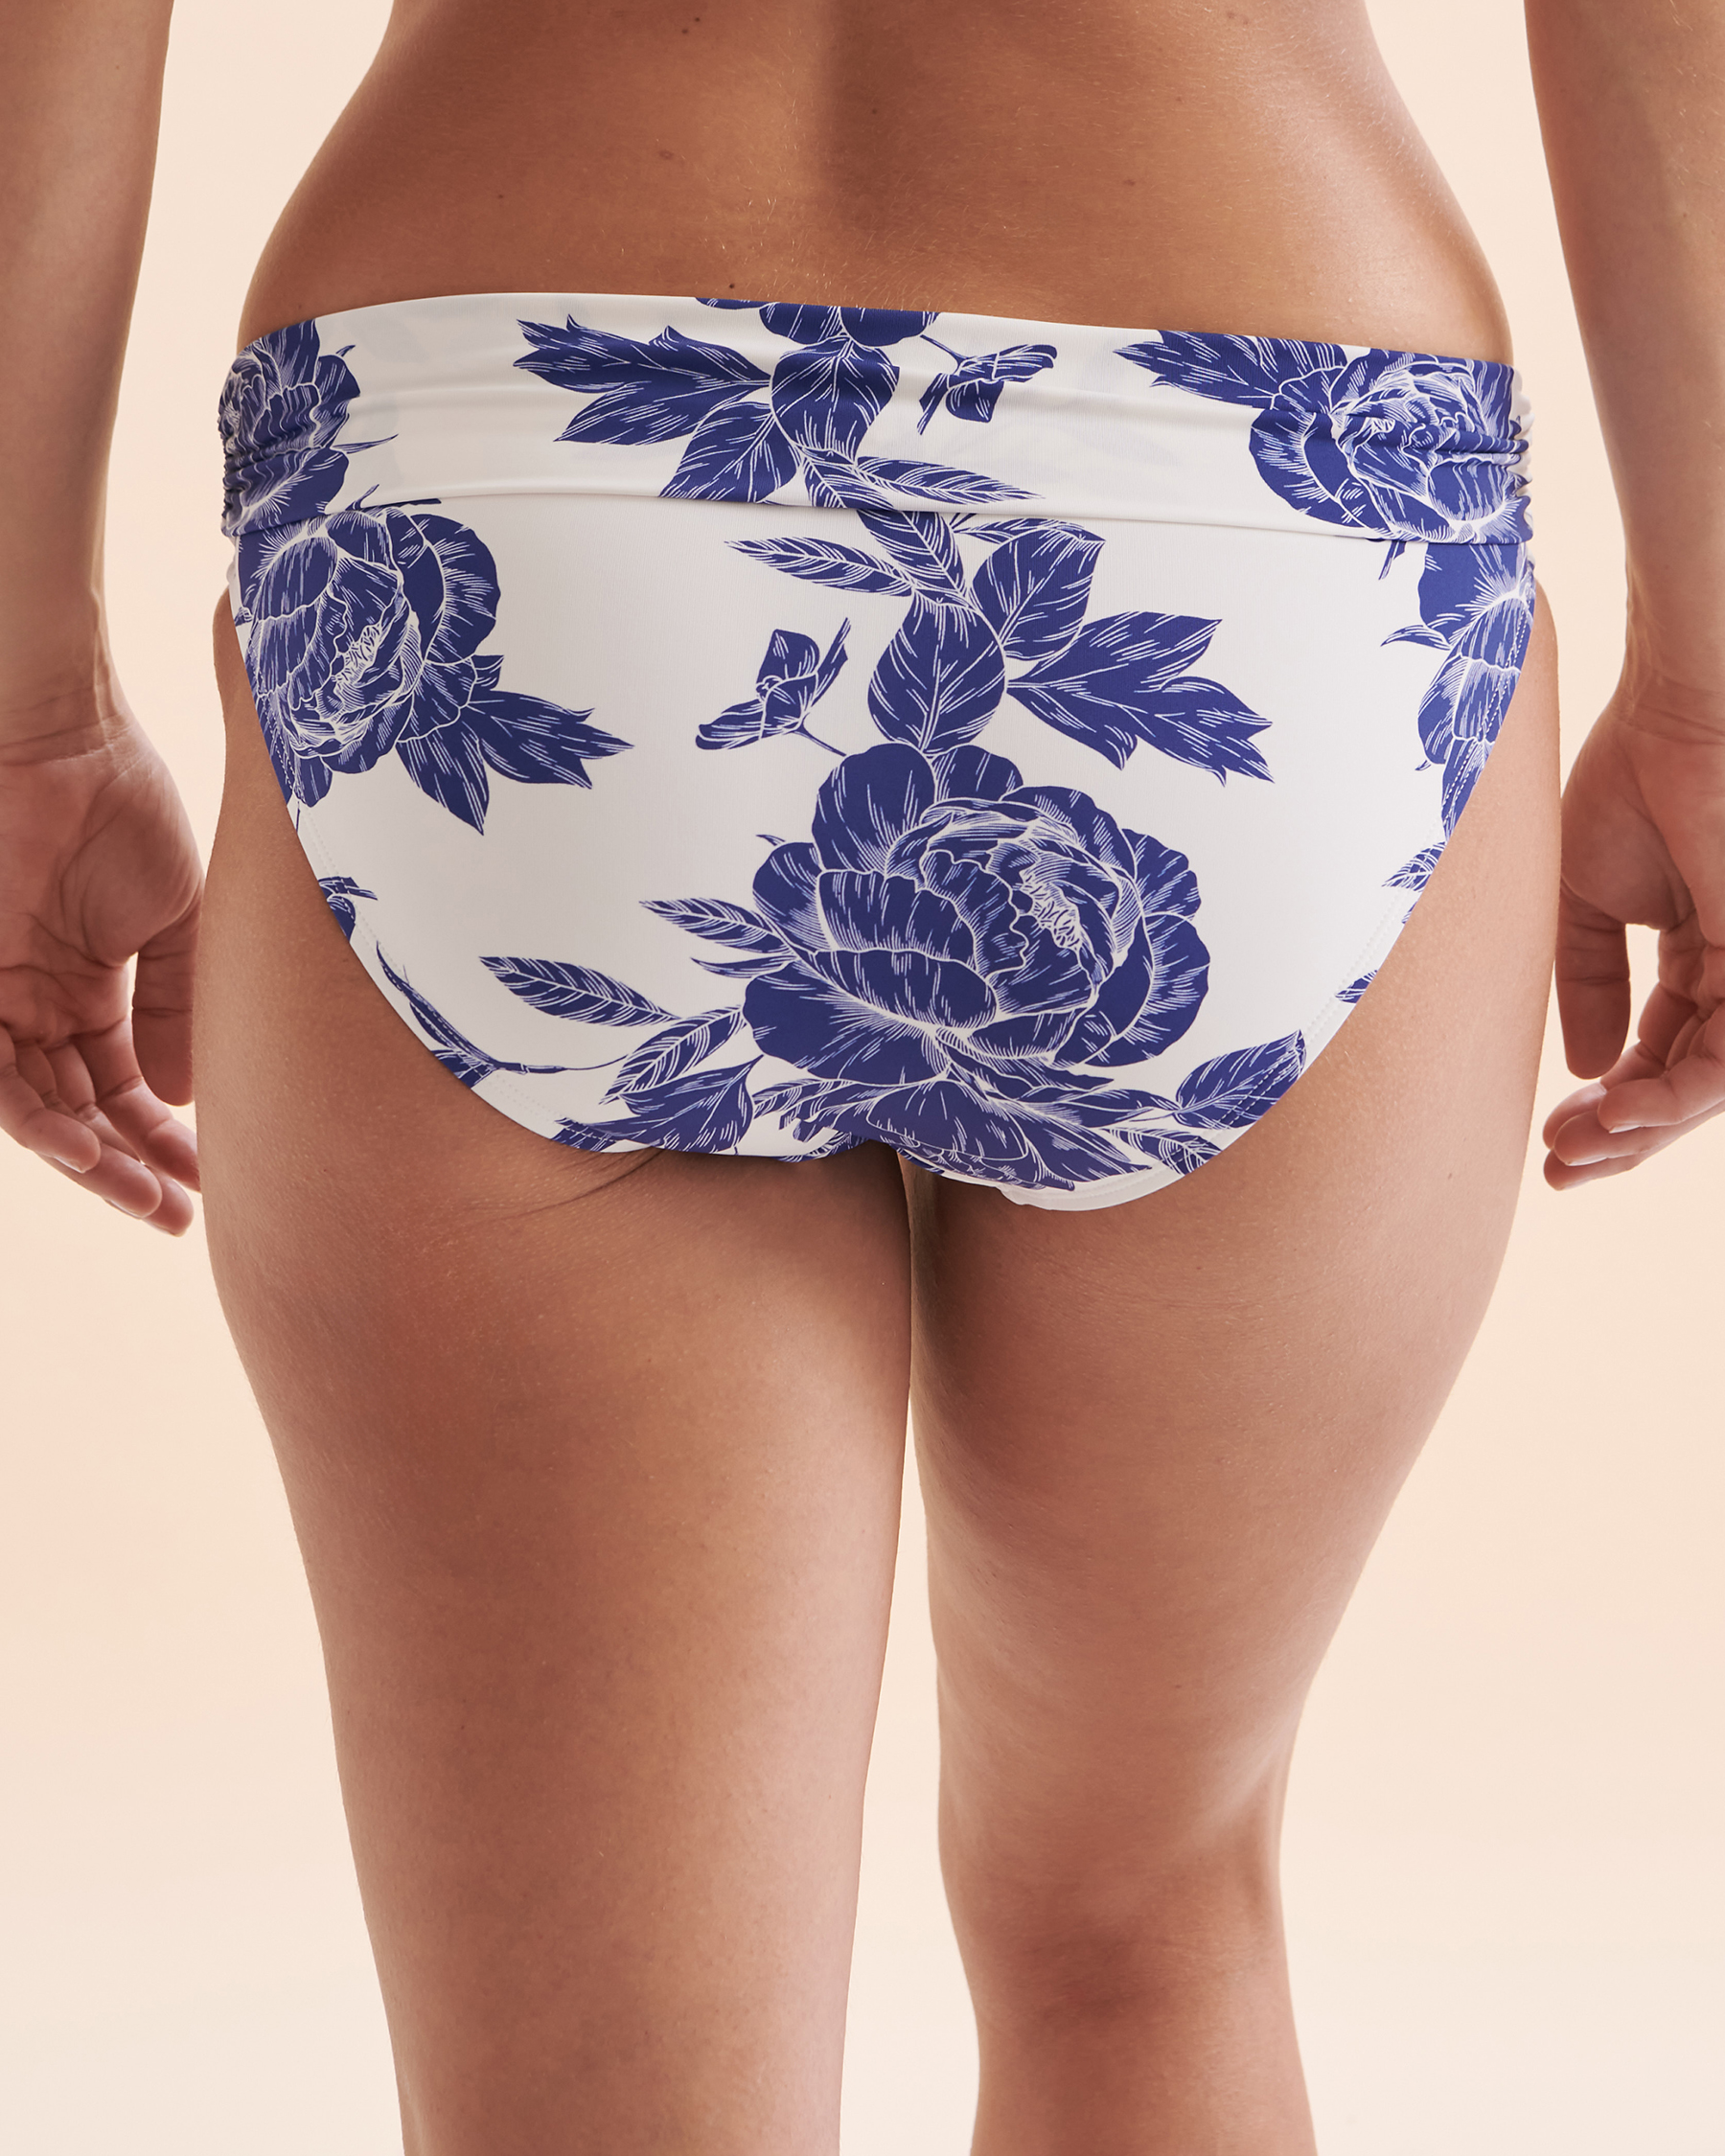 TURQUOISE COUTURE Floral Folded Waistband Bikini Bottom White & Blue Floral 01300271 - View6